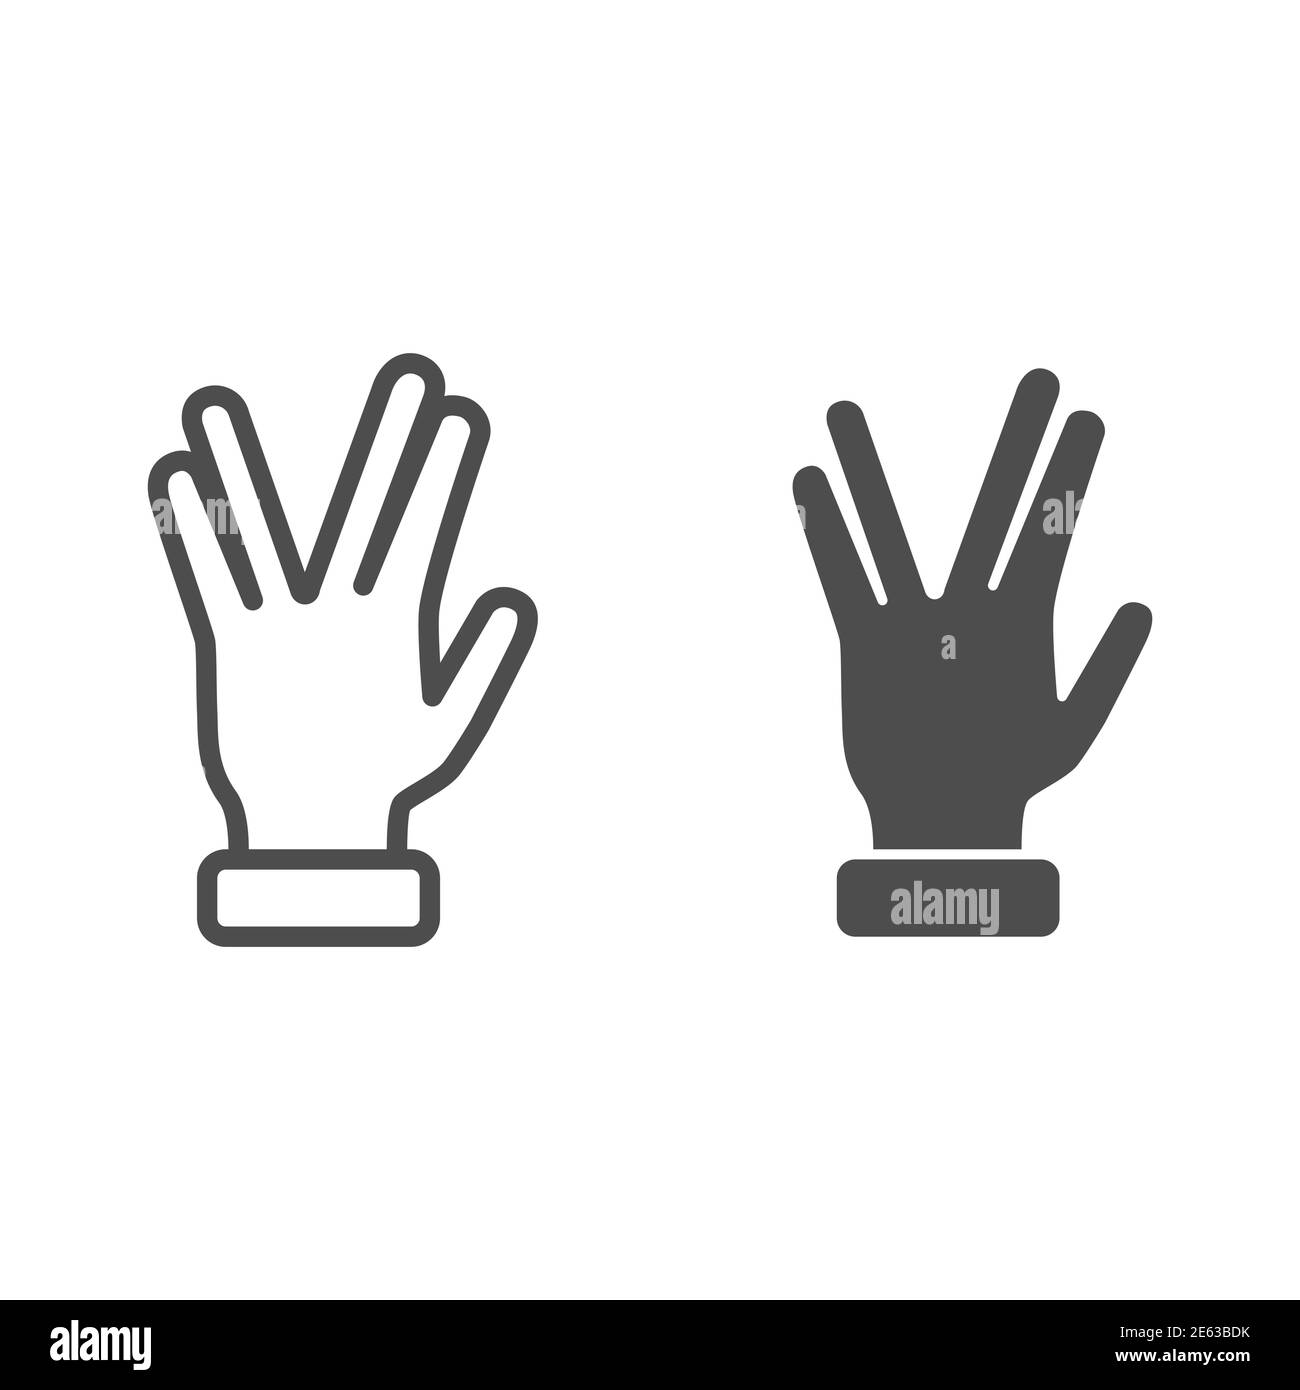 Four fingers gesture line and solid icon, gestures concept, Vulcan salute hand sign on white background, Hand with four fingers up icon in outline Stock Vector